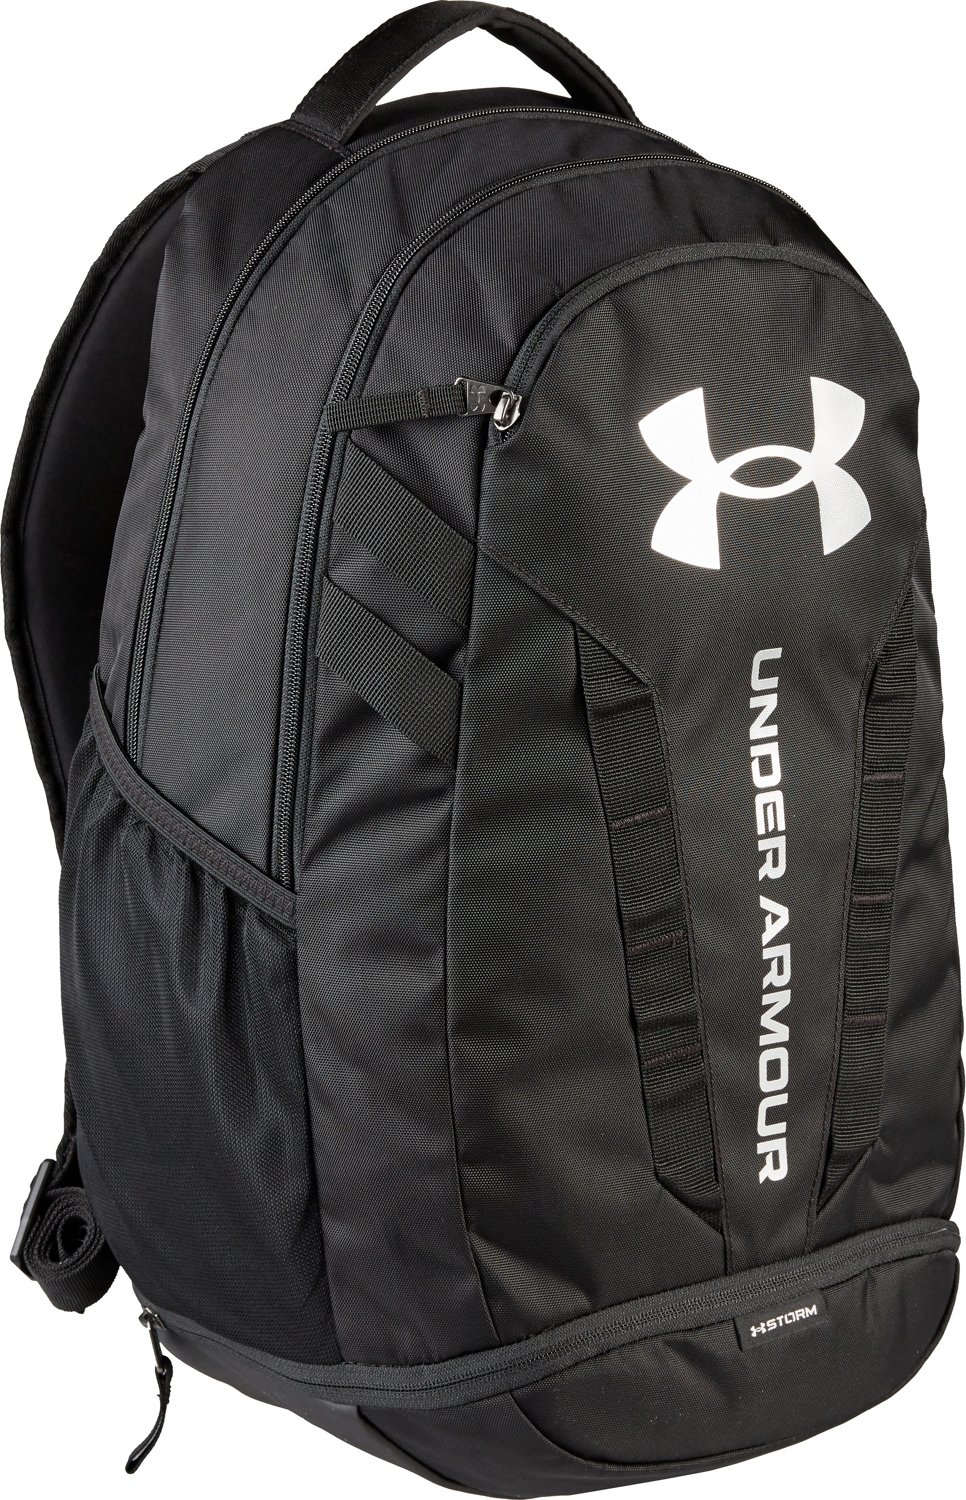 Under Armour 5.0 Backpack |